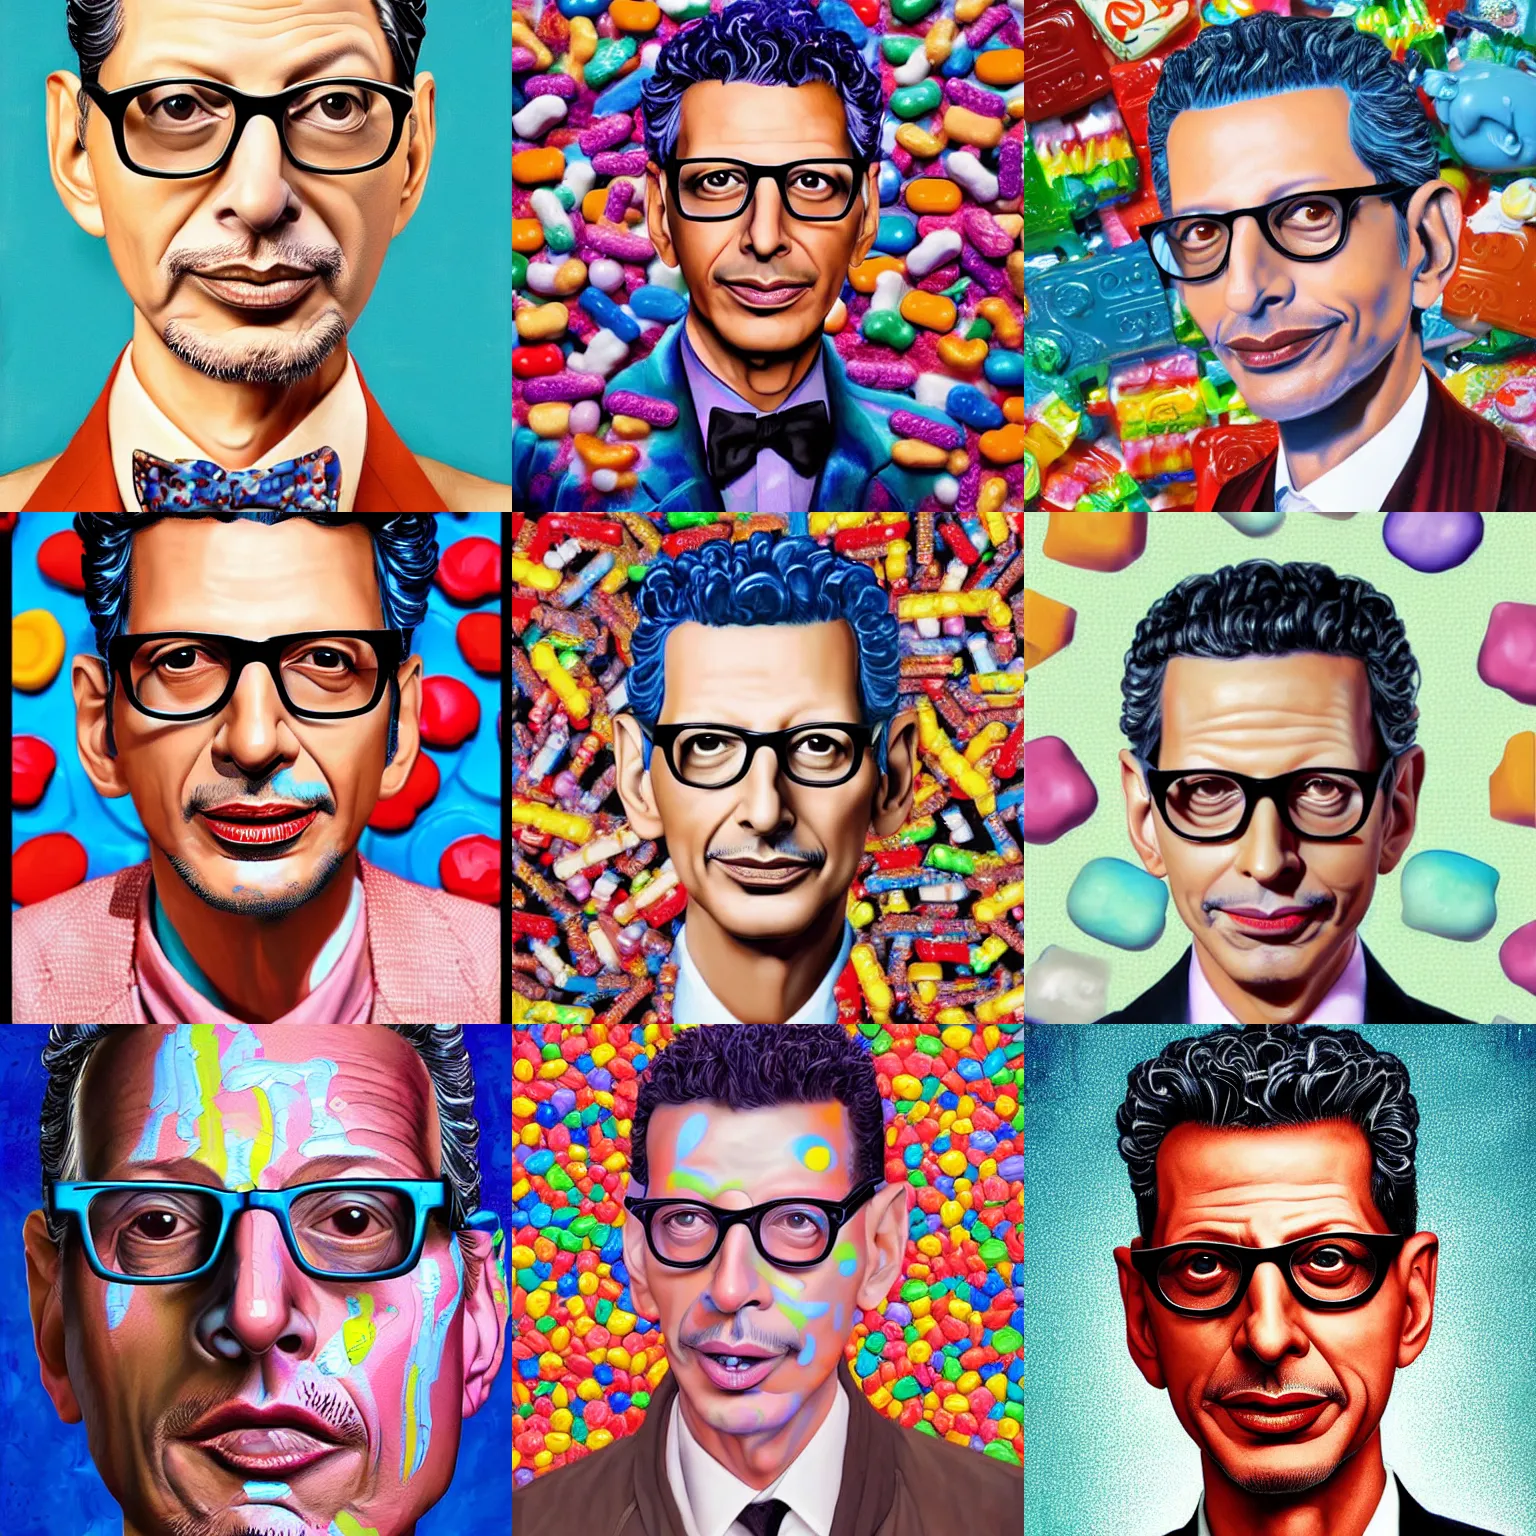 Prompt: digital painting of jeff goldblum made out of candy by james jean, hikari shimoda, mark ryden in the style of surrealism